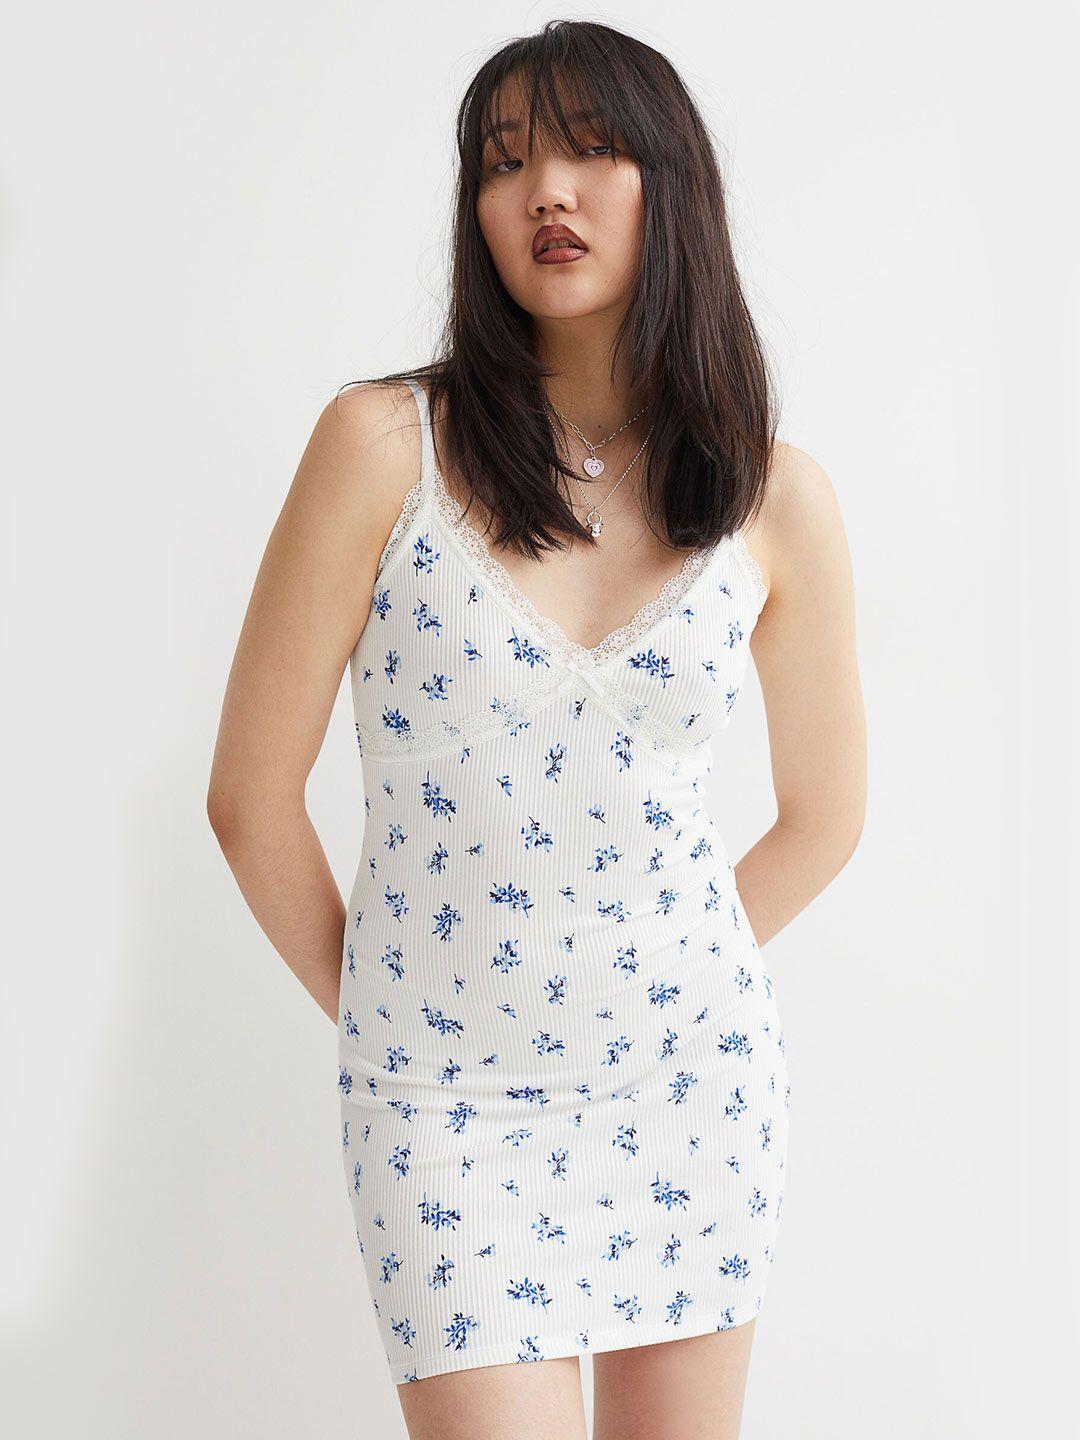 h&m white & blue floral printed ribbed lace bodycon dress